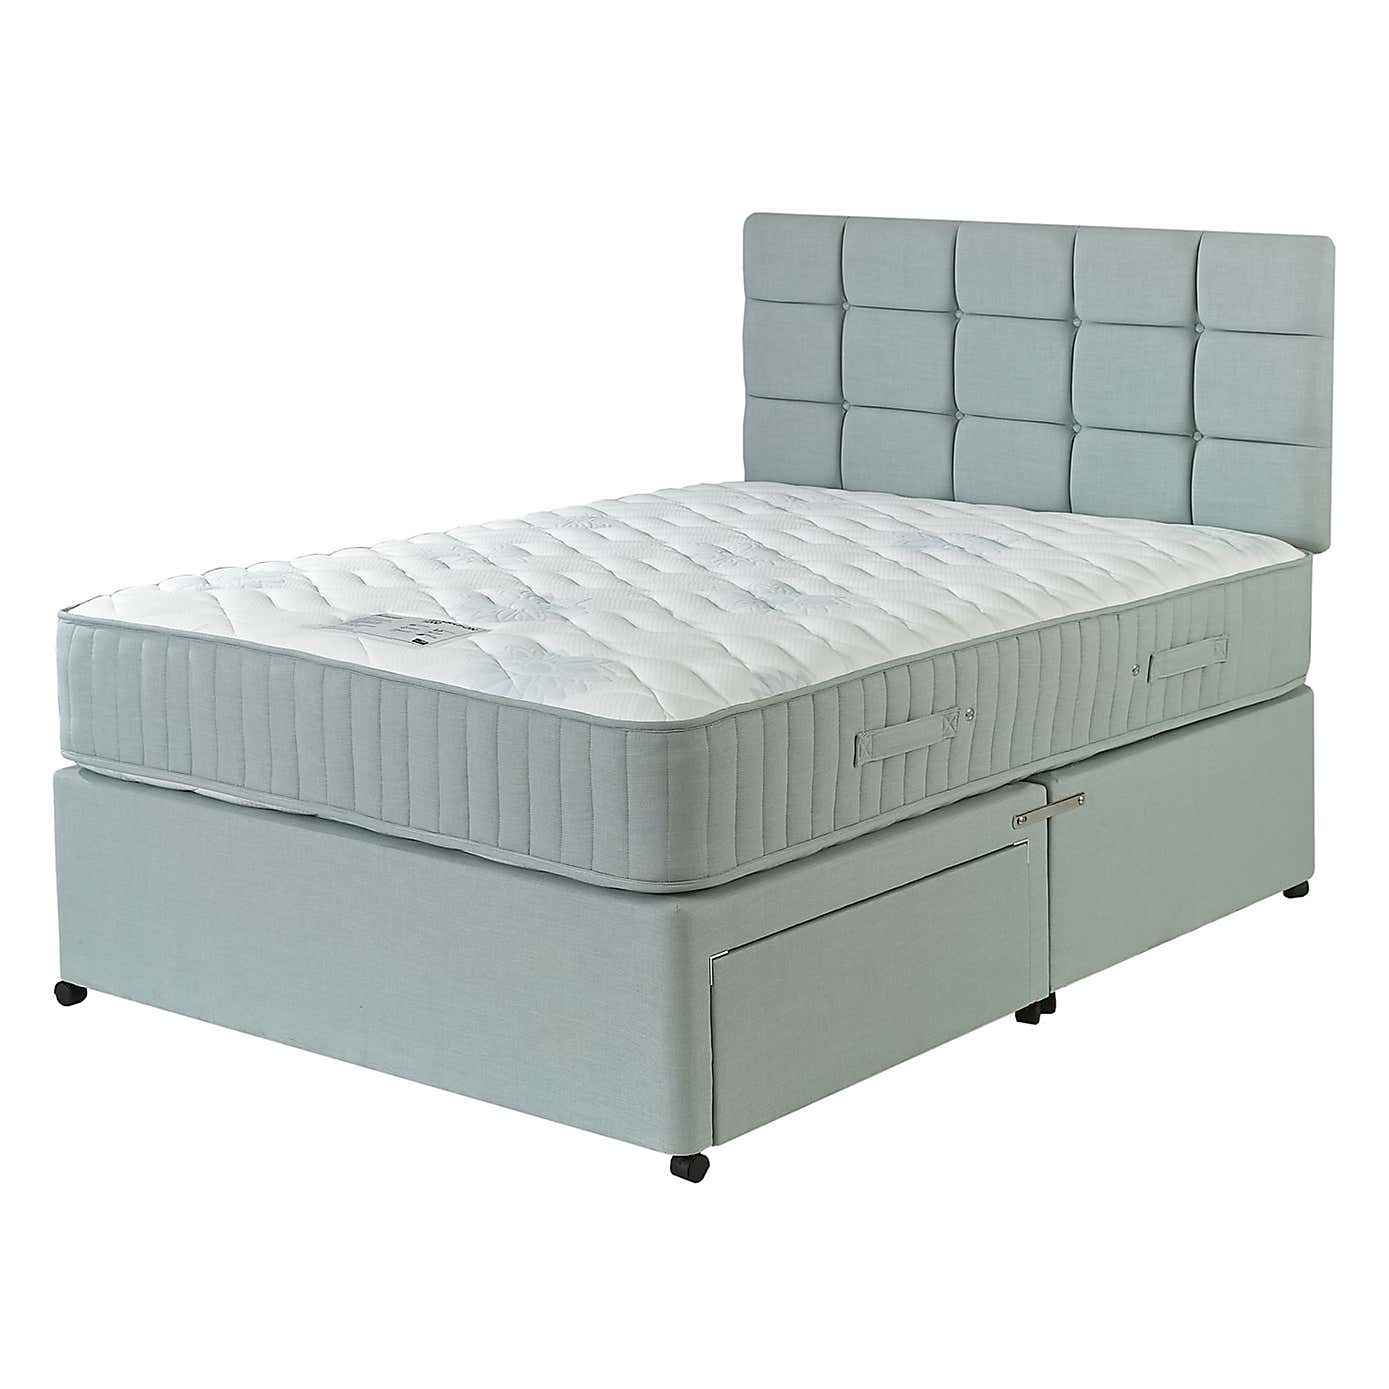 Bedmaster Sensations 1200 Pocket Mattress With A Bed Base-Better Bed Company 